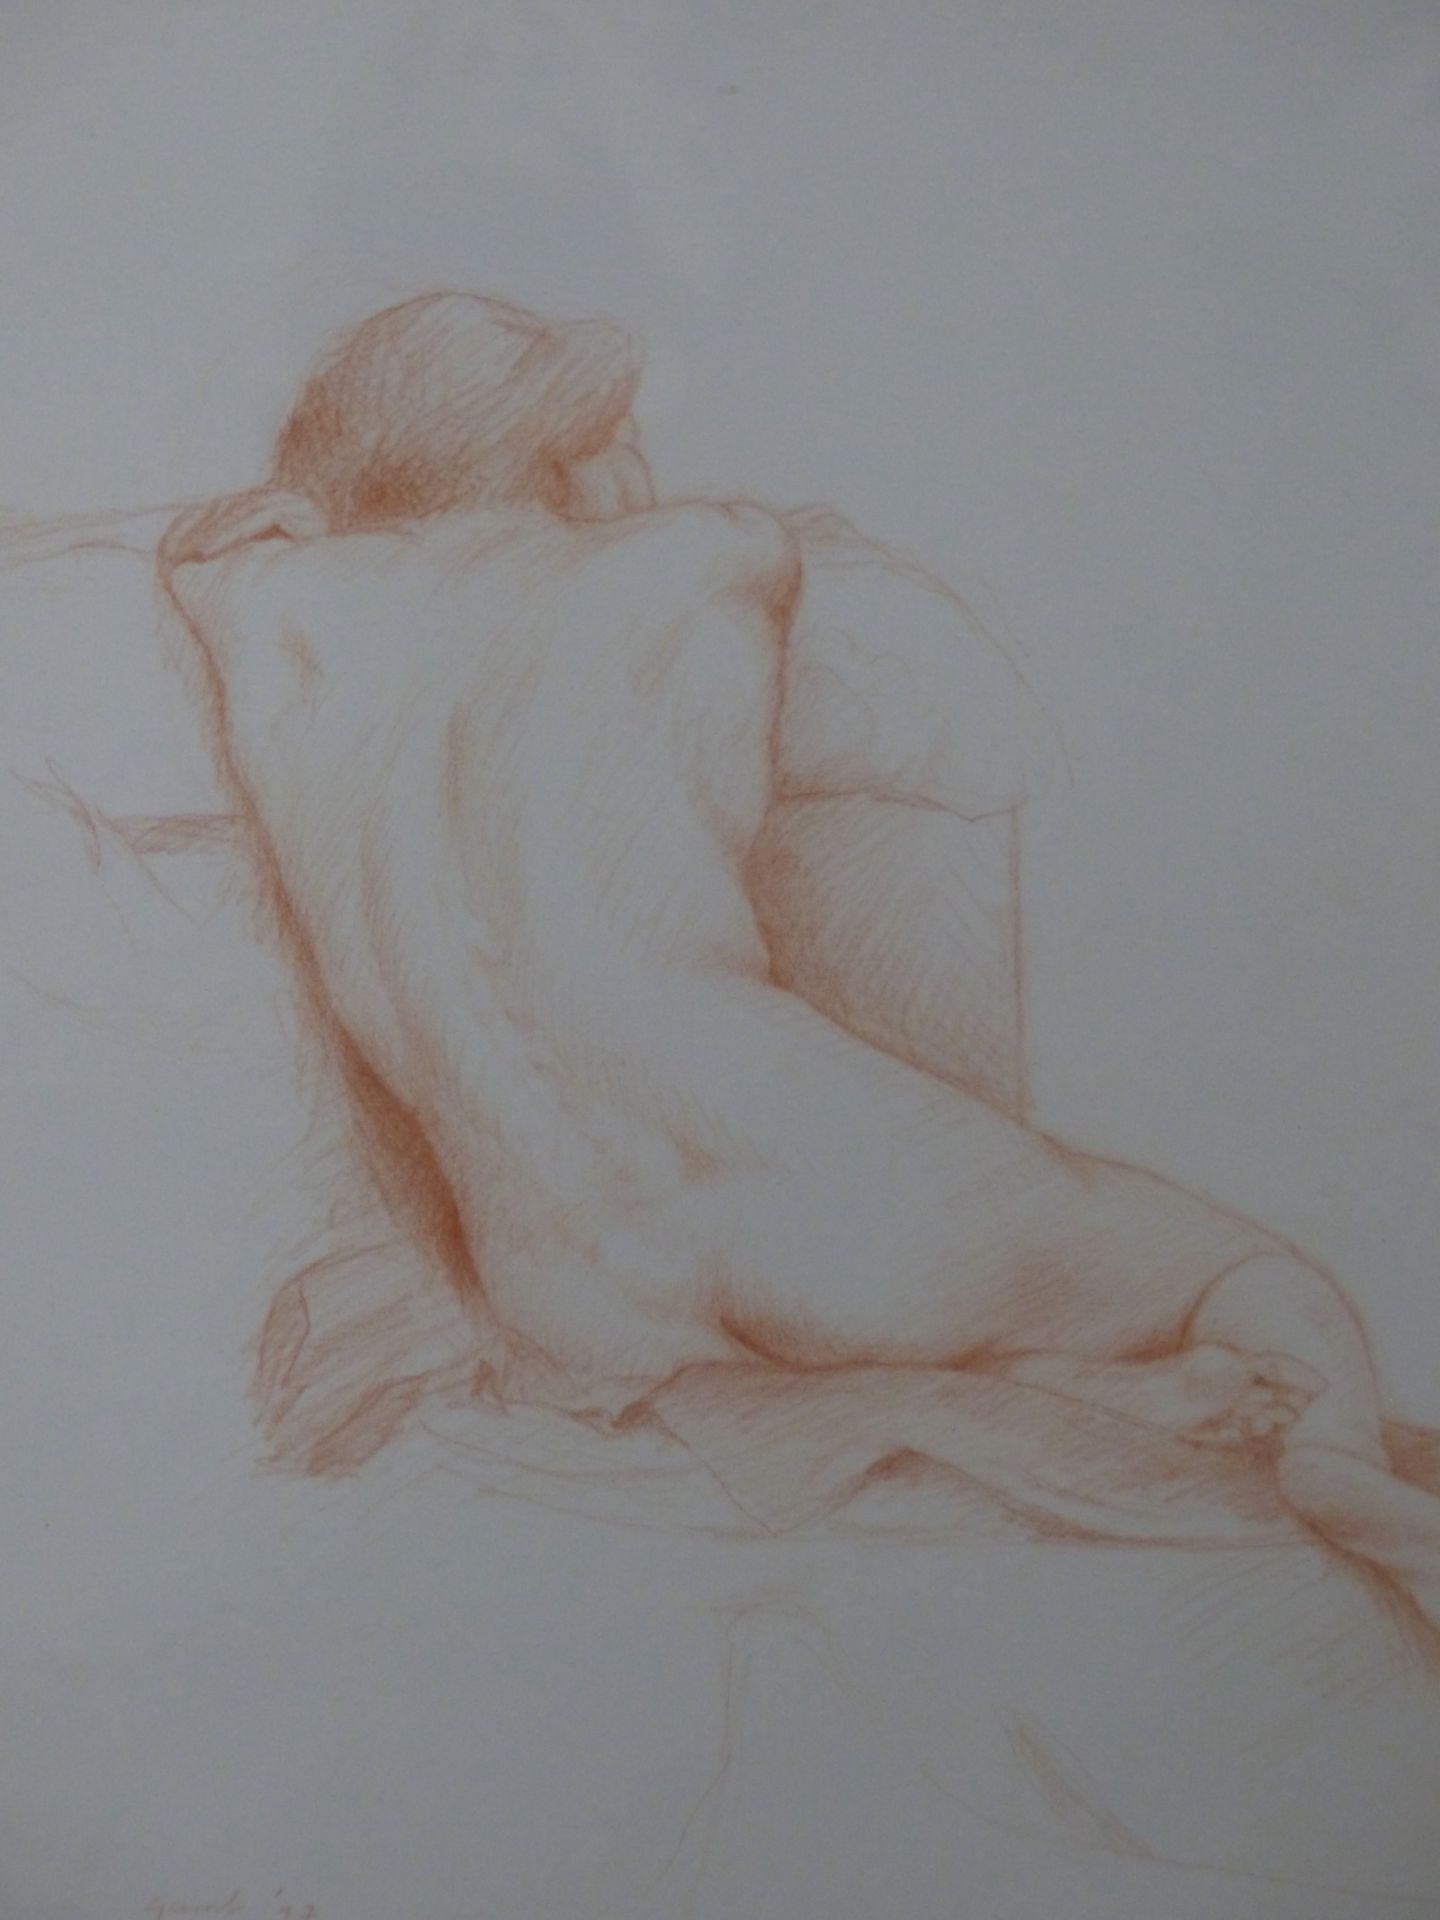 A LATE 20TH CENTURY RED CHALK STUDY OF A NUDE, INDISTINCTLY SIGNED (GUMB?) AND DATED '97, EXHIBITION